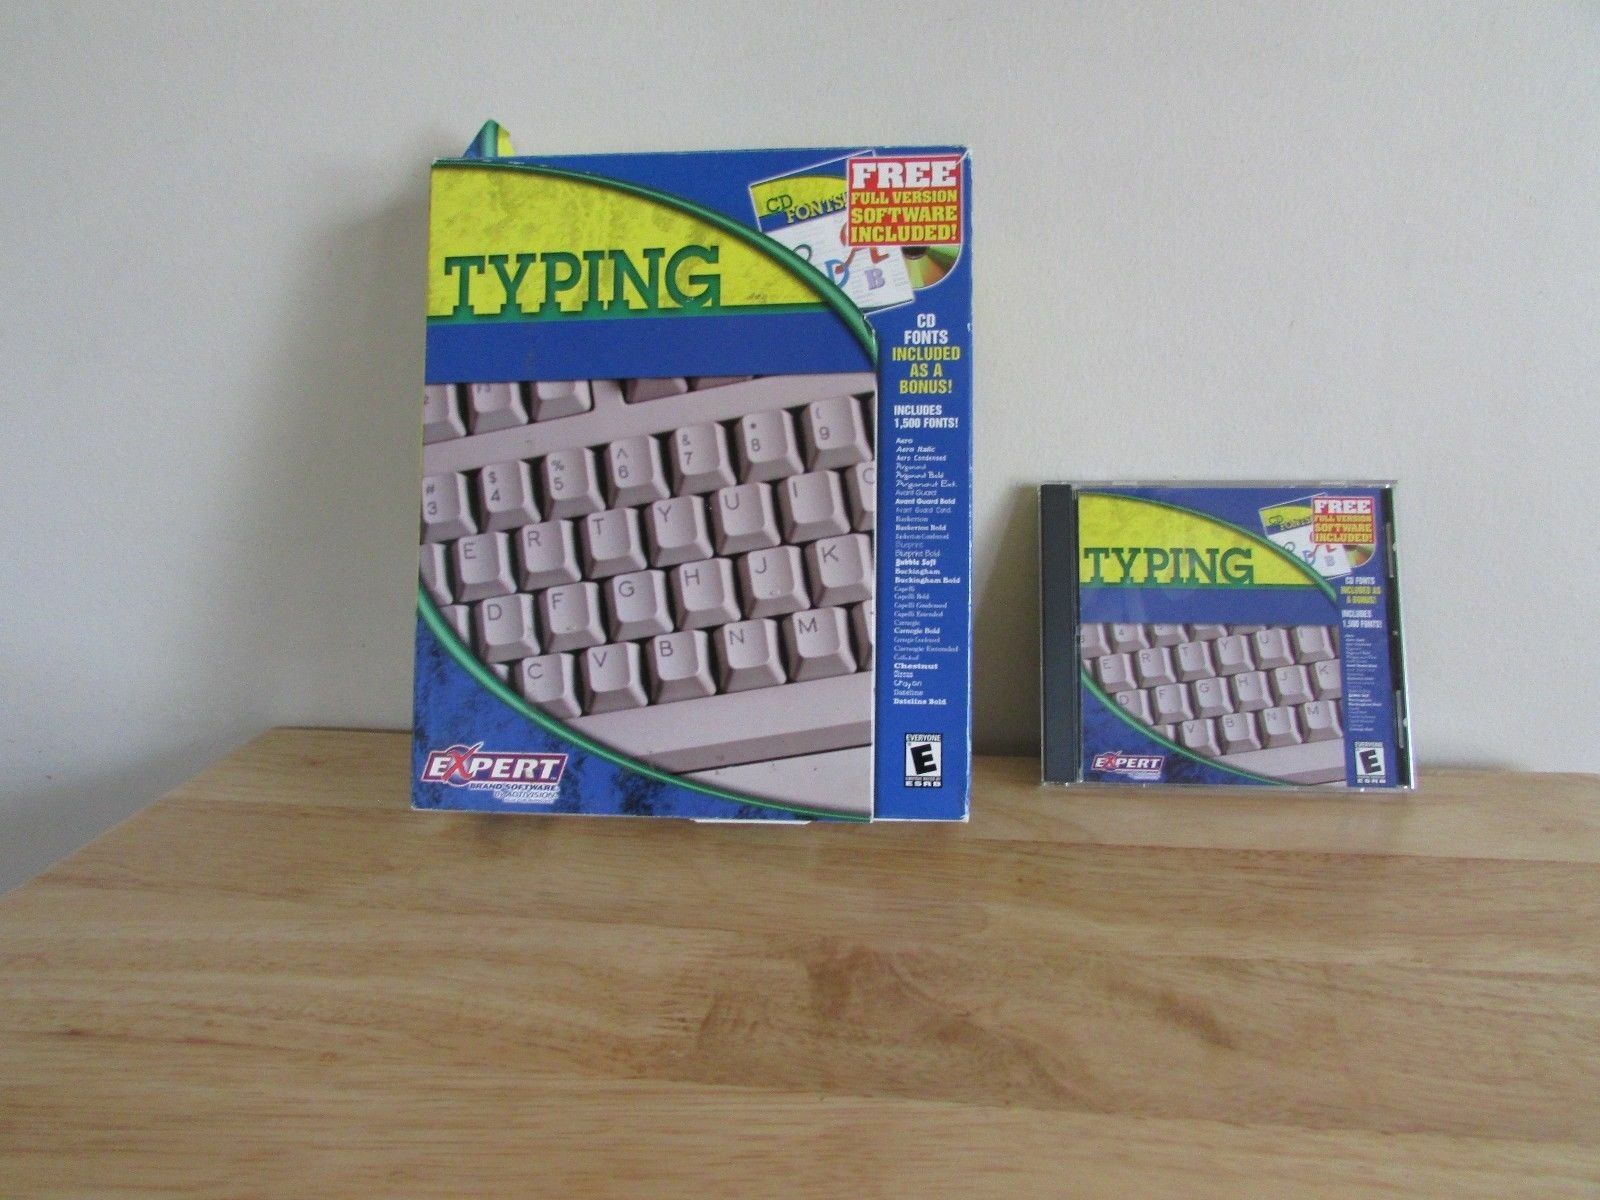 Typing - Expert Full Version Software